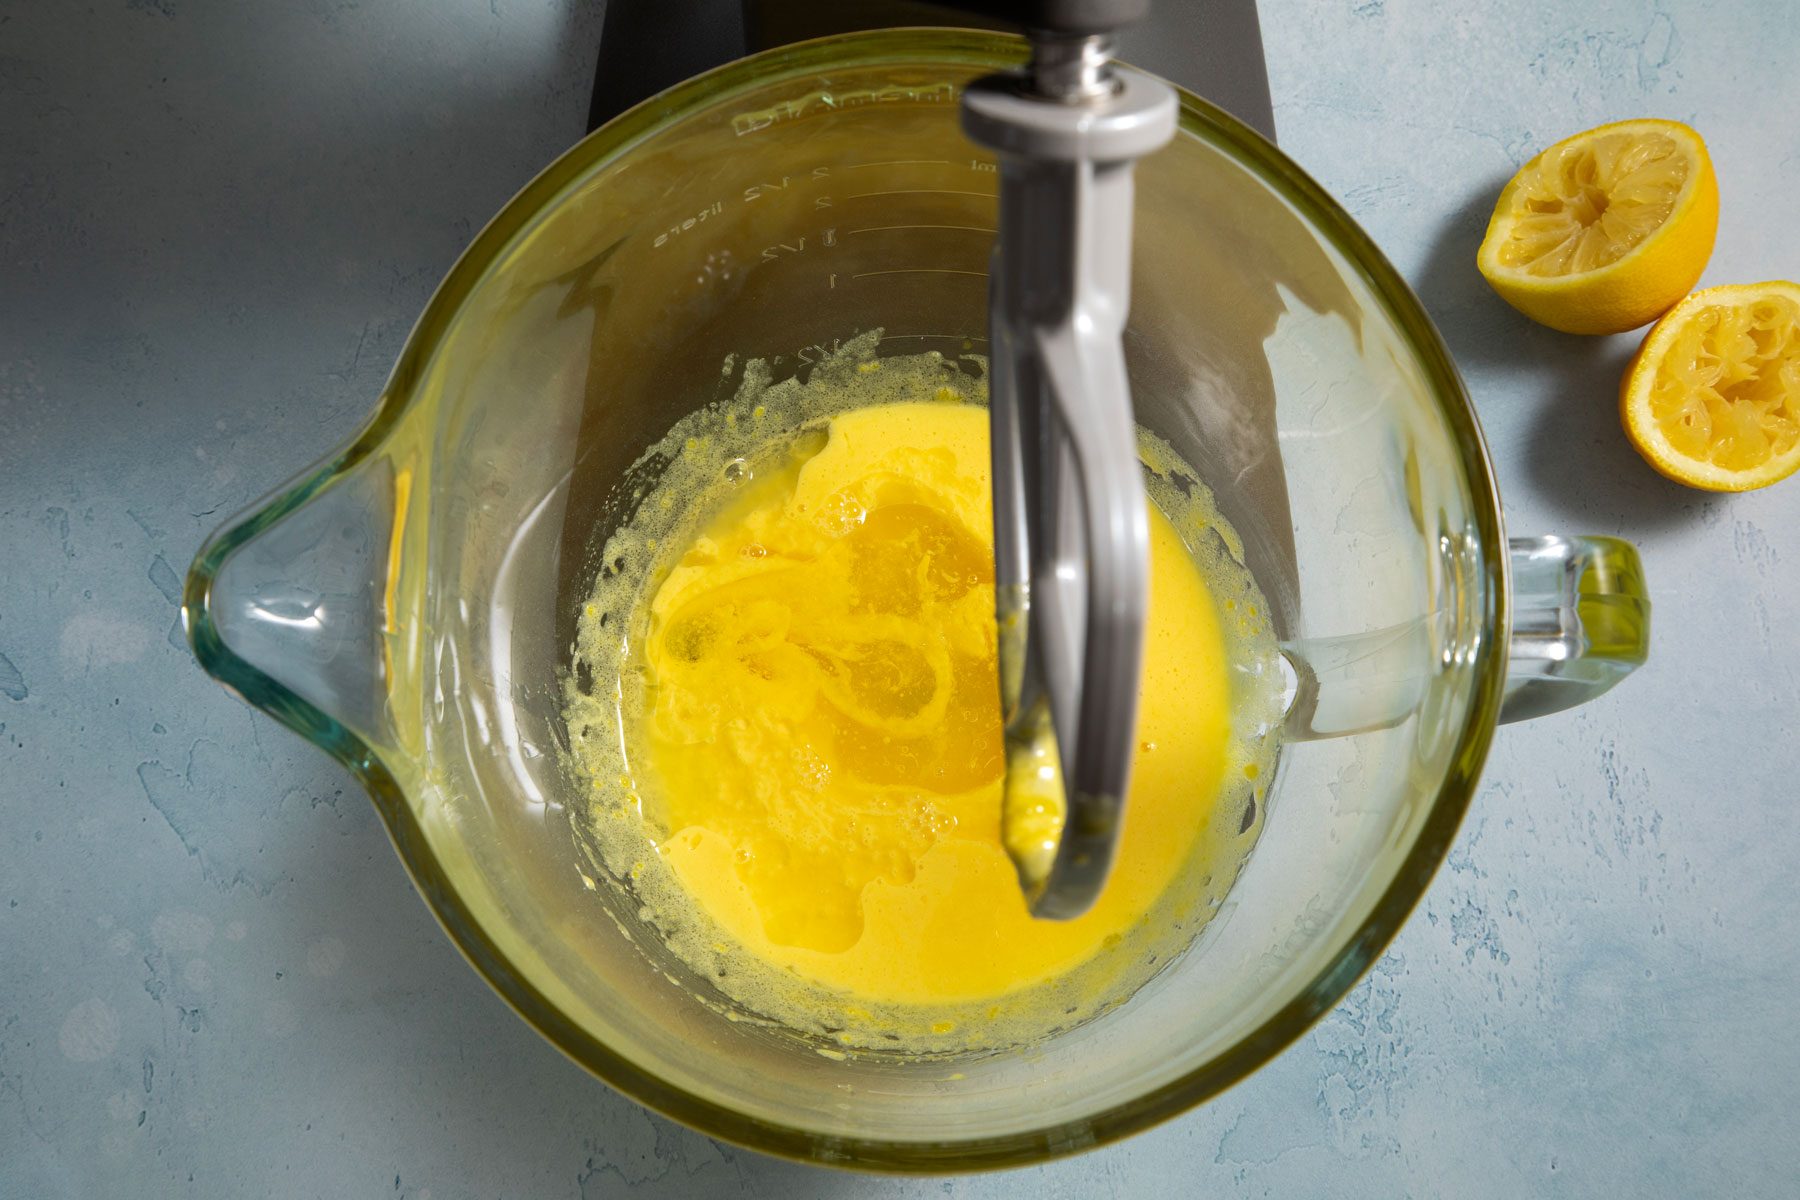 Mixing lemon juice and egg yolk in a blender on a marble countertop